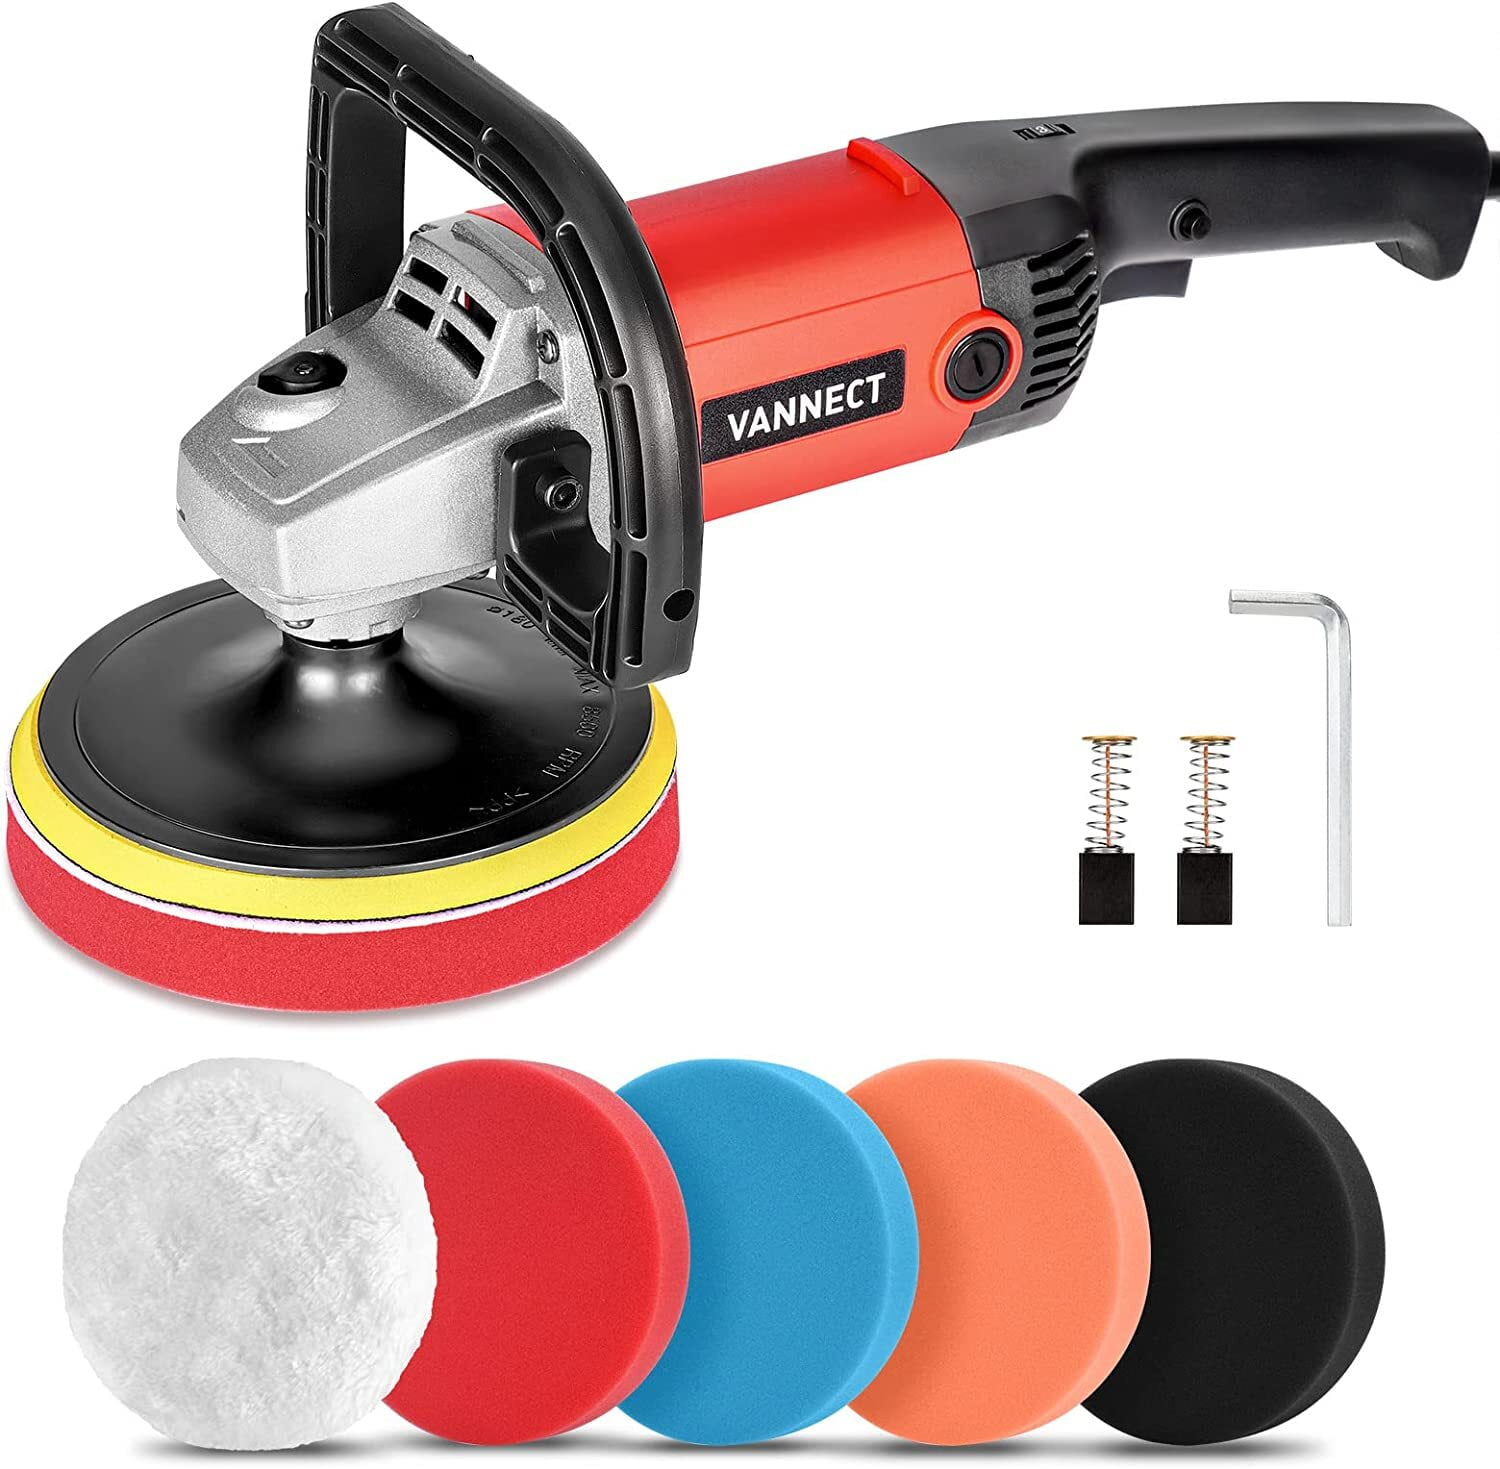 VANNECT Buffer Polisher, 1200W 7-inch Polisher with 6 Variable Speed, 5  Foam Pads, Detachable Handle and Safety Lock Car Buffer Polisher Ideal for  Car Sanding, Polishing, Waxing (Upgraded) 